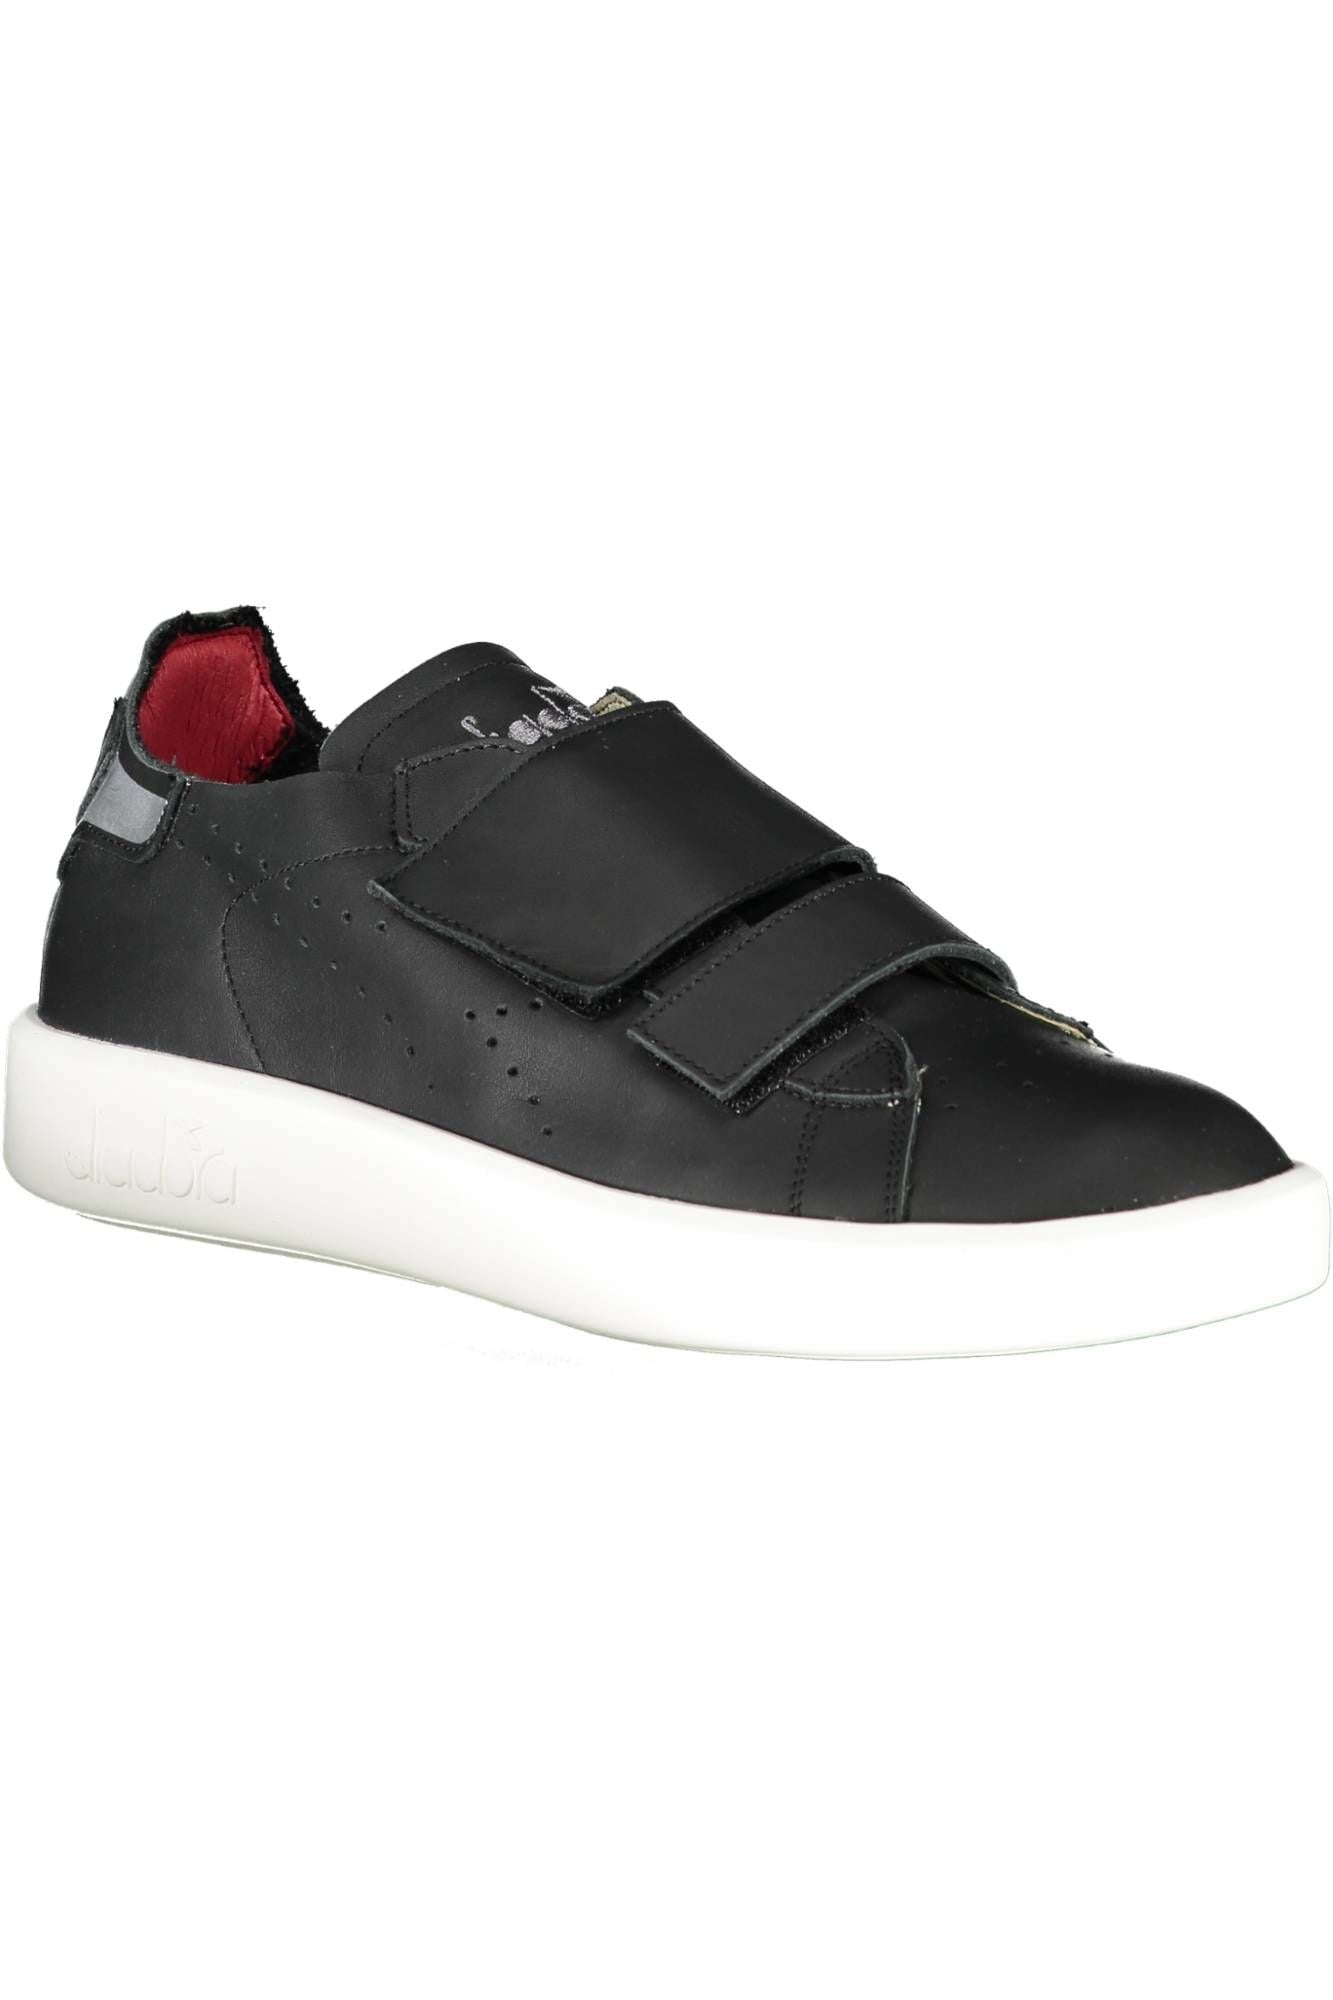 Sleek Black Leather Sneakers with Contrast Details